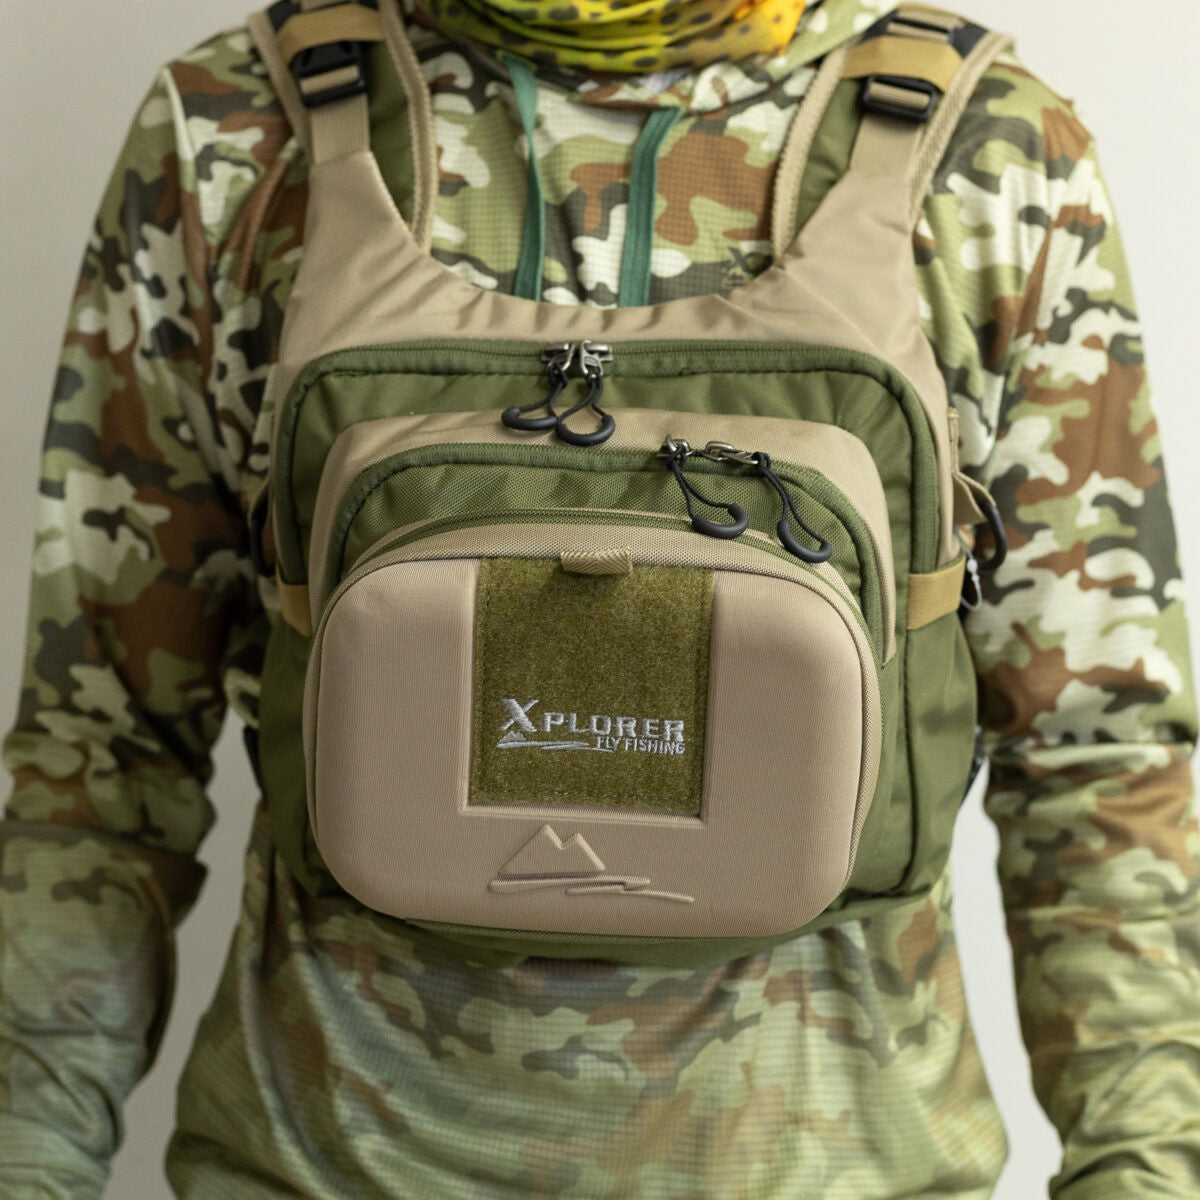 XPLORER TECHNICAL CHEST PACK - Emerger Fly Fishing South Africa